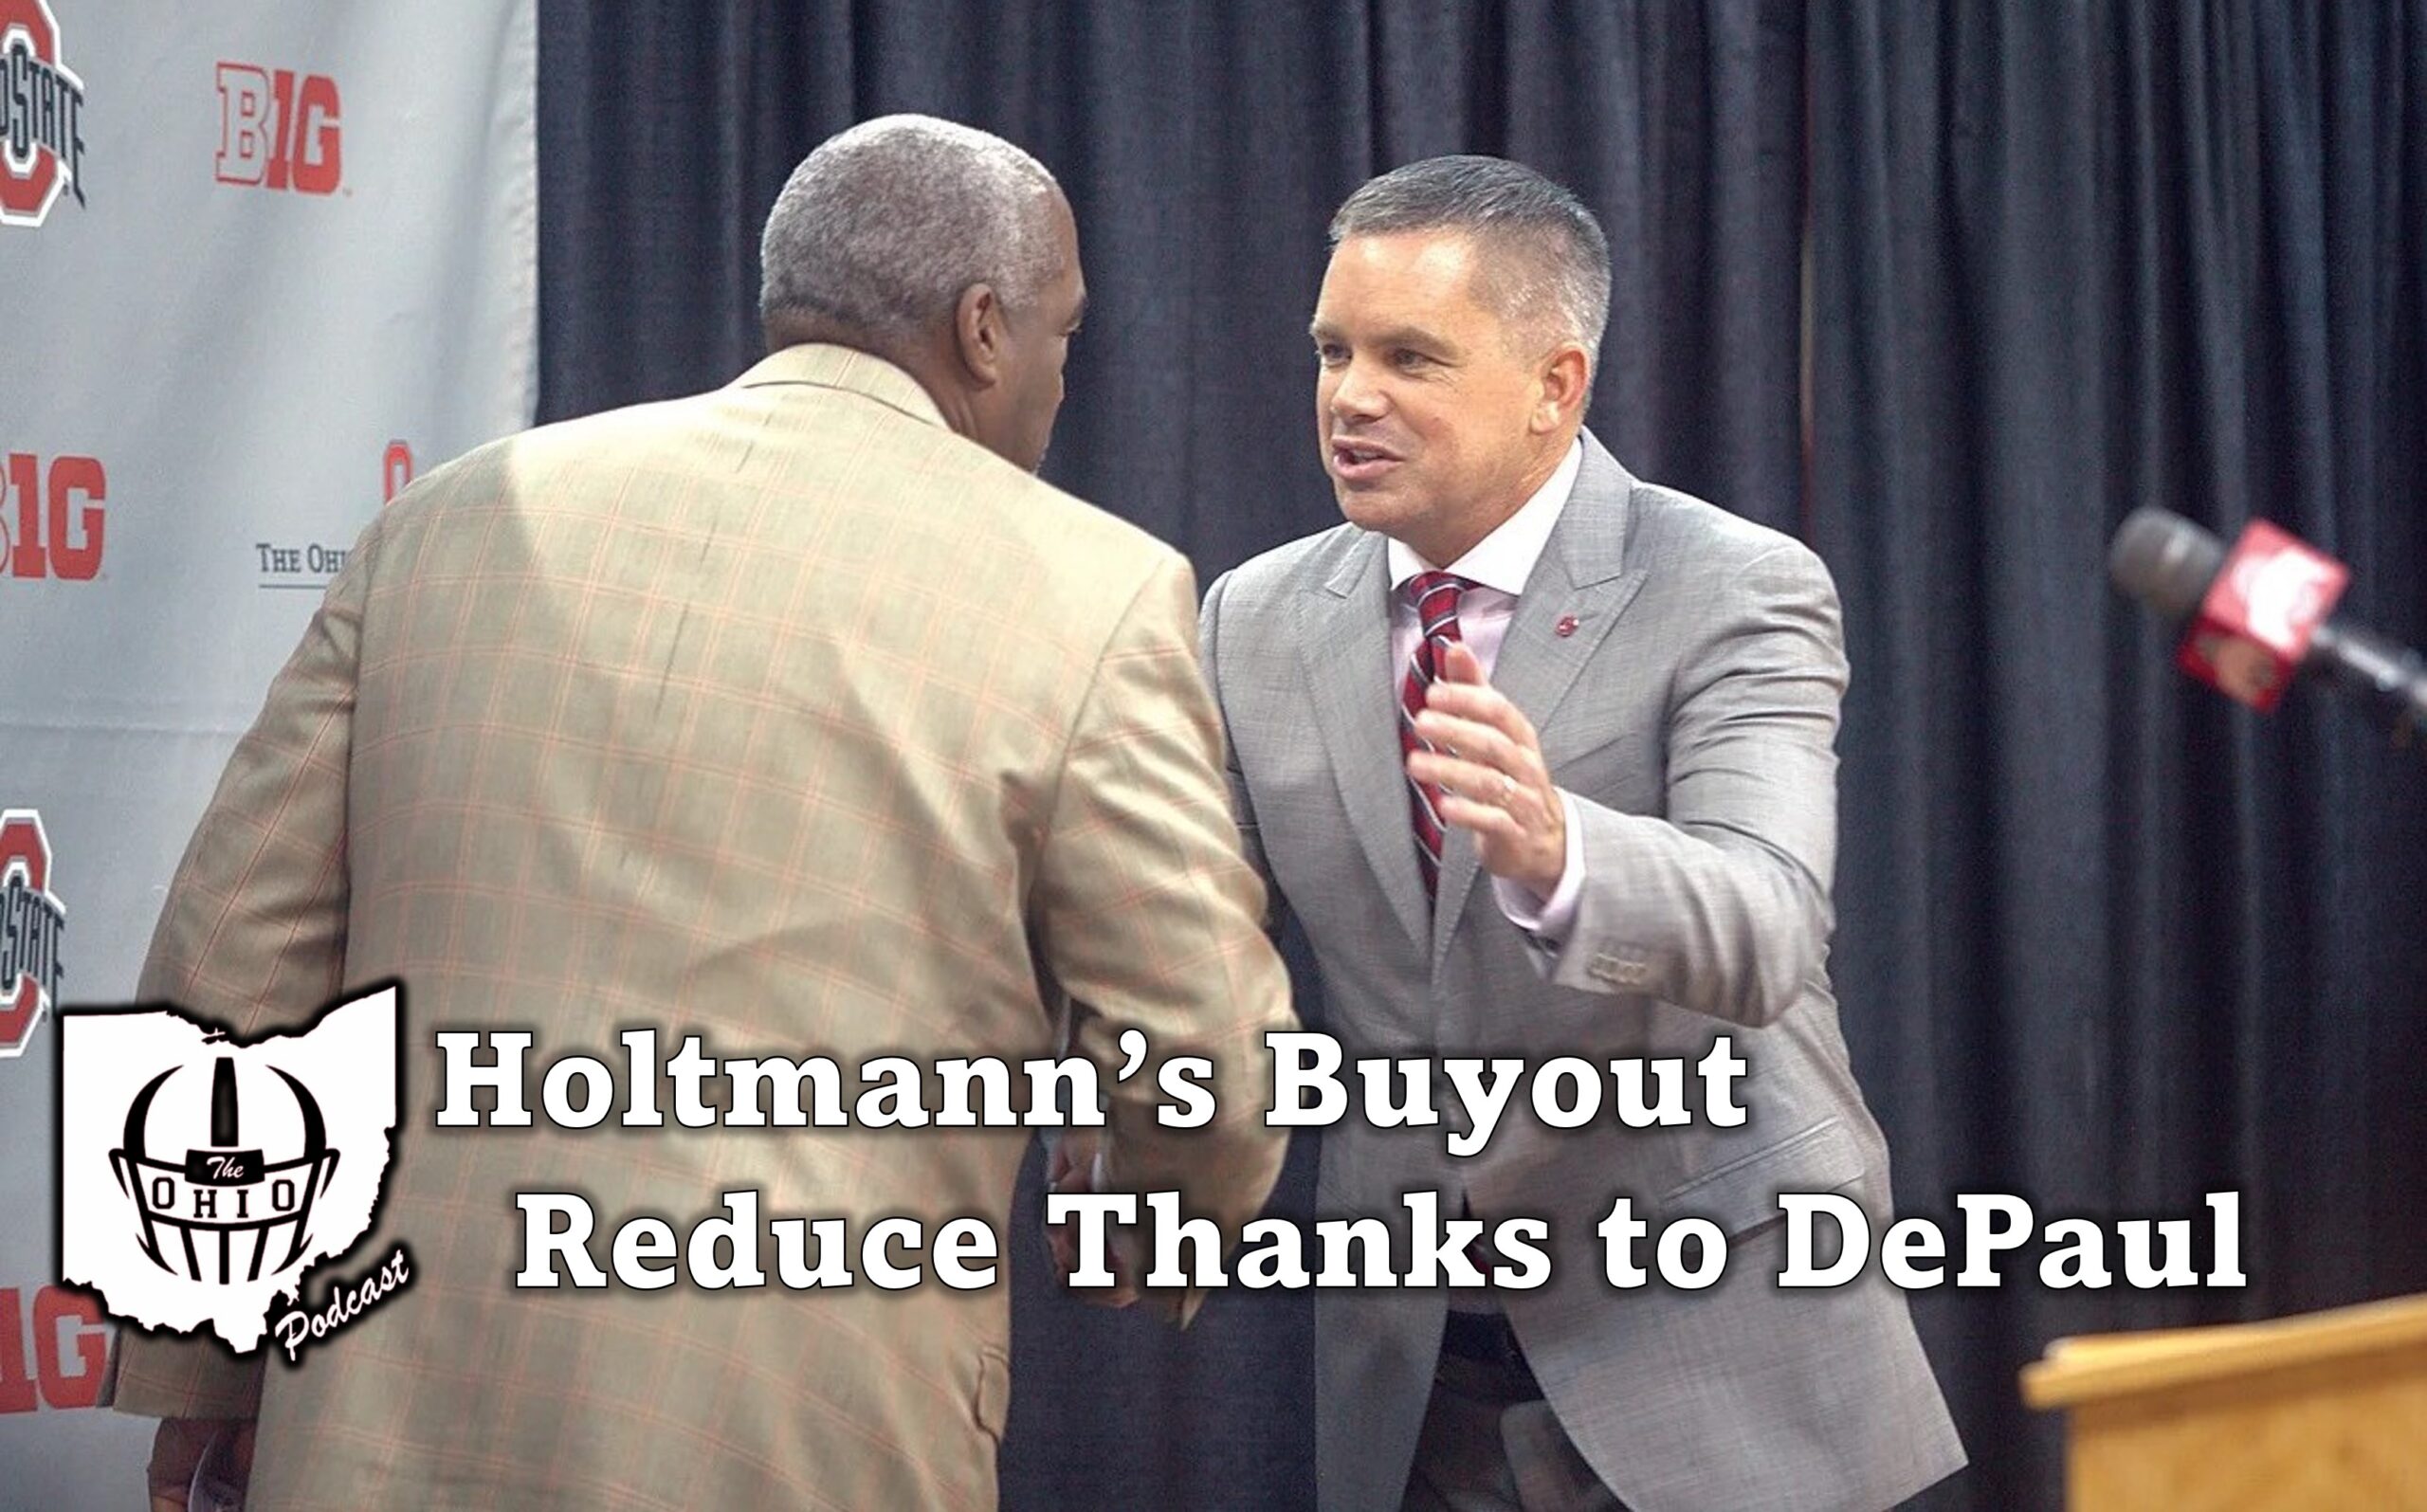 Ohio State’s Buyout for Holtmann Reduced Thanks to DePaul